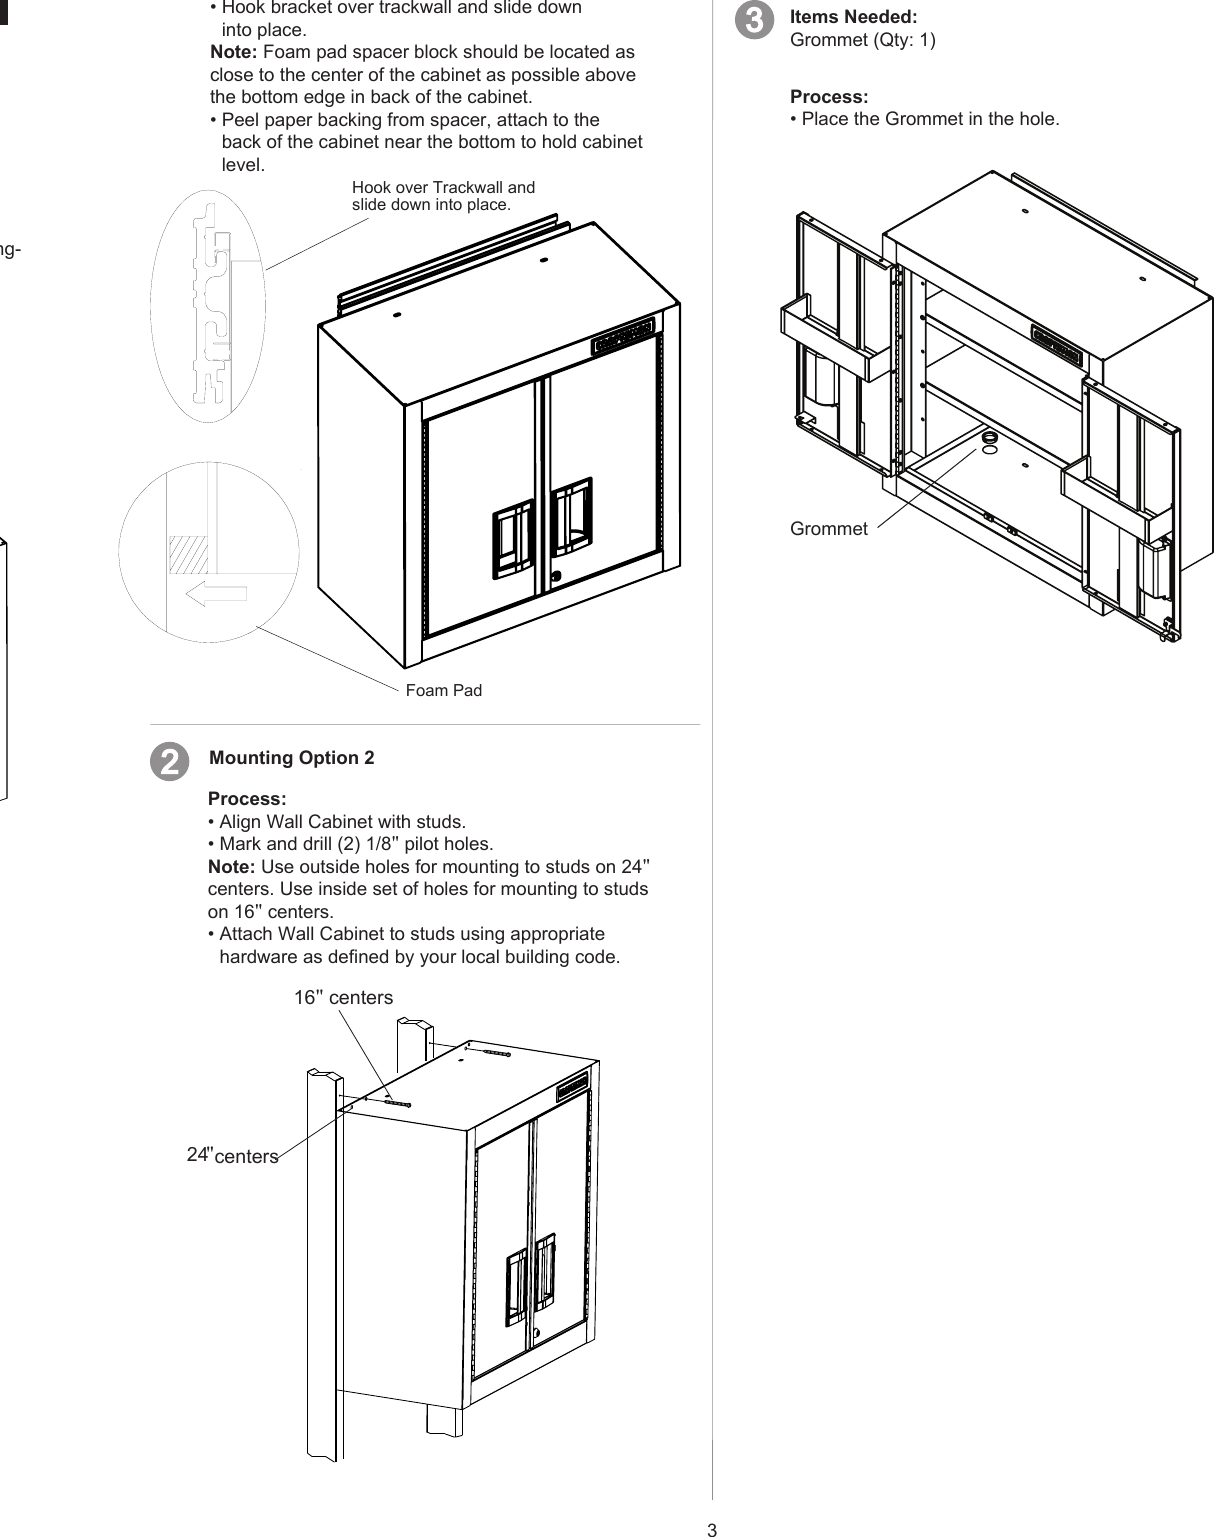 Page 3 of 8 - Craftsman Craftsman-Premium-Heavy-Duty-Hanging-Wall-Cabinet-Use-And-Care-Manual-  Craftsman-premium-heavy-duty-hanging-wall-cabinet-use-and-care-manual